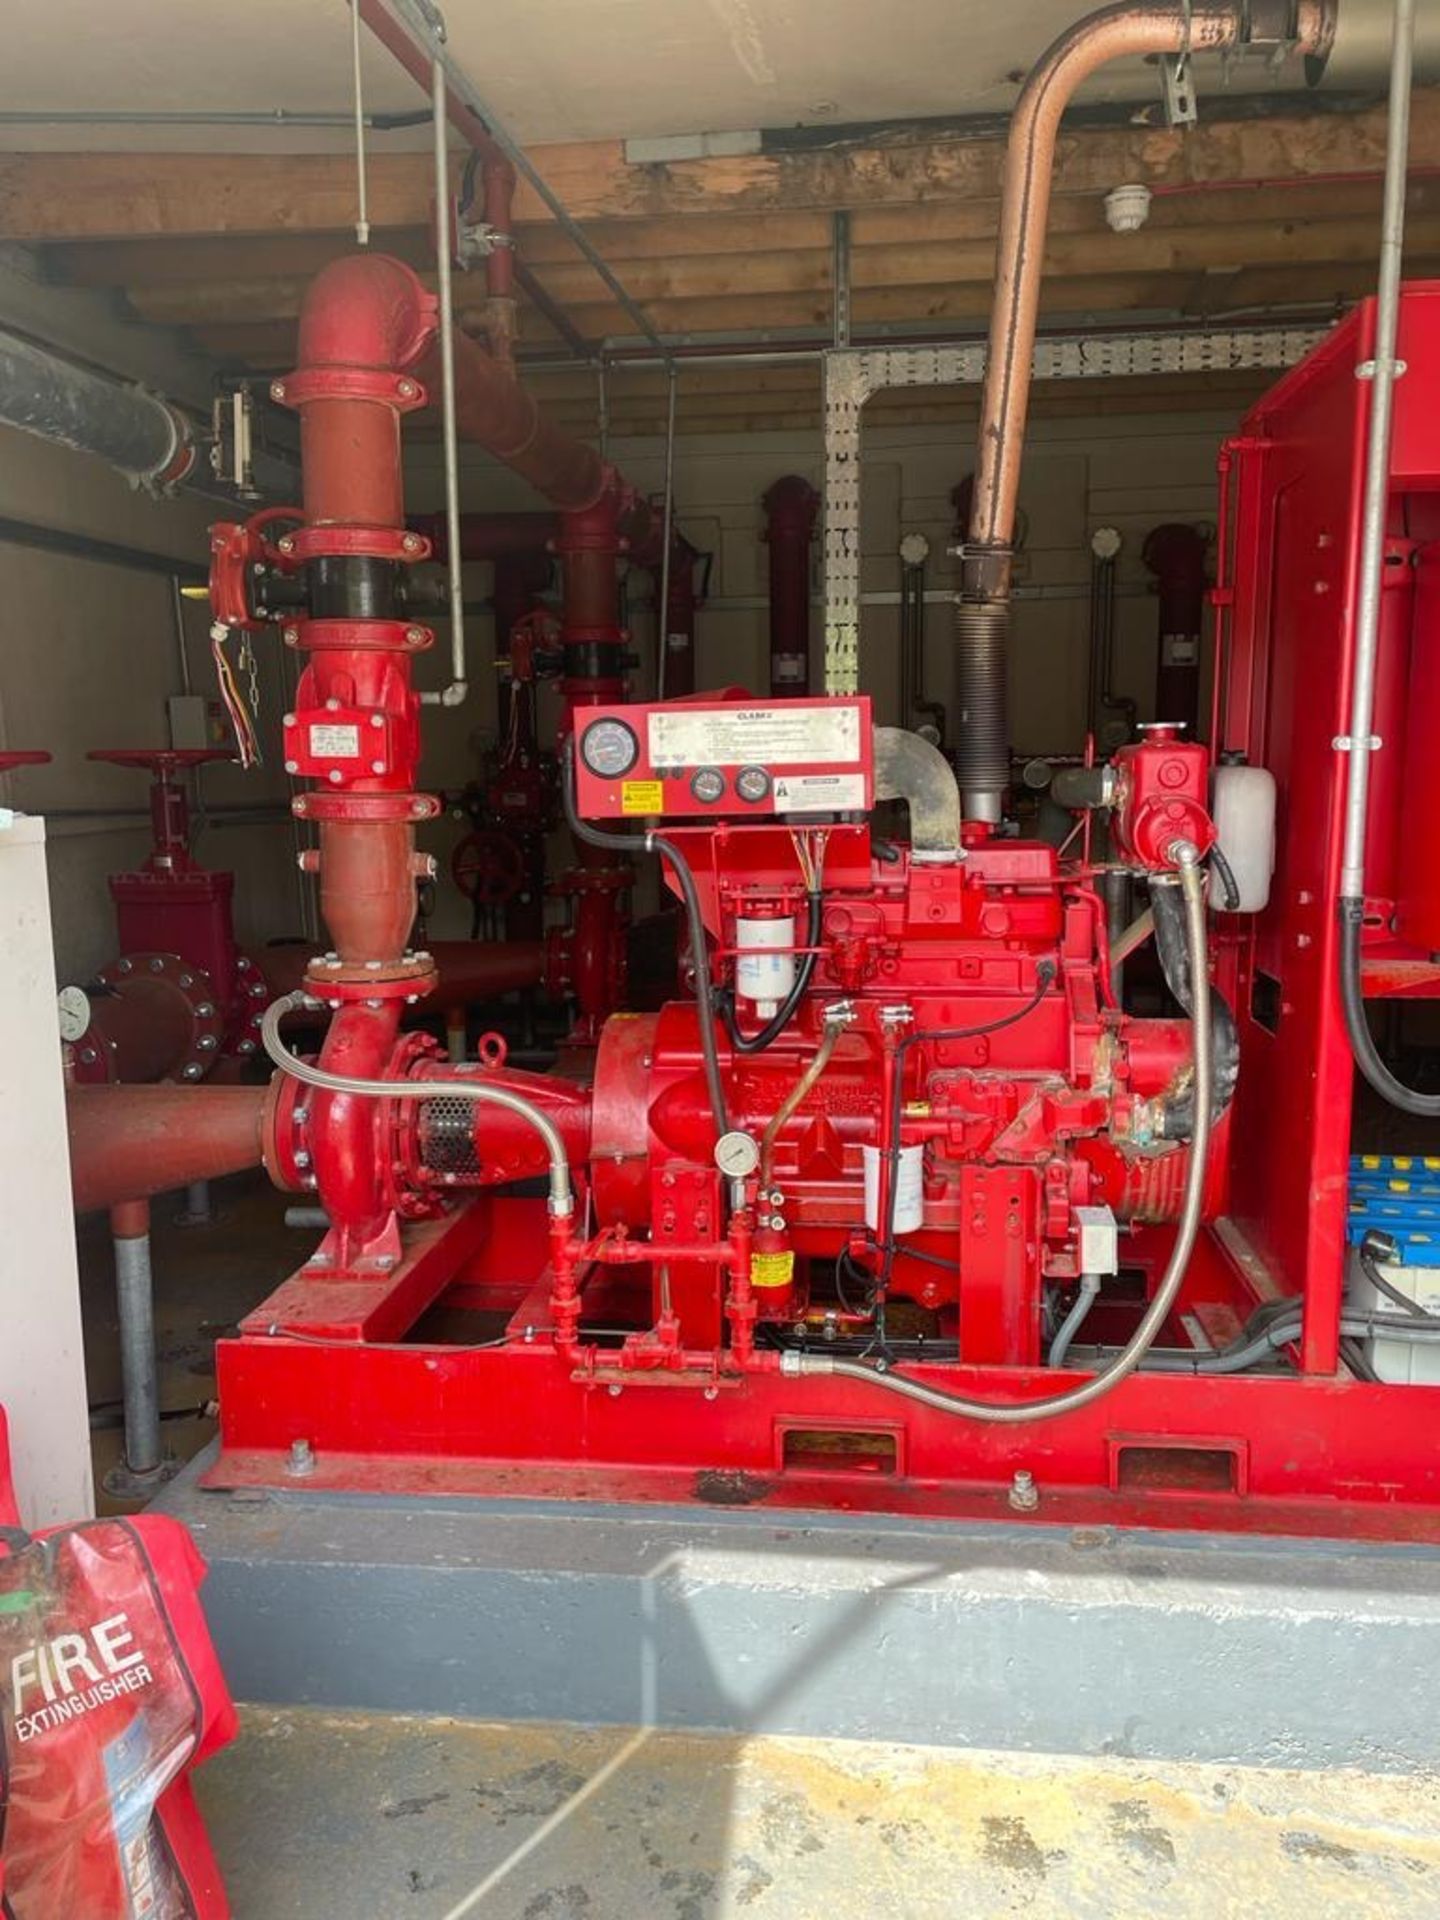 Tyco Clarke Grundfos DIESEL ENGINE EMERGENCY STANDBY FIRE PUMP, 125 hours at time of listing, fitted